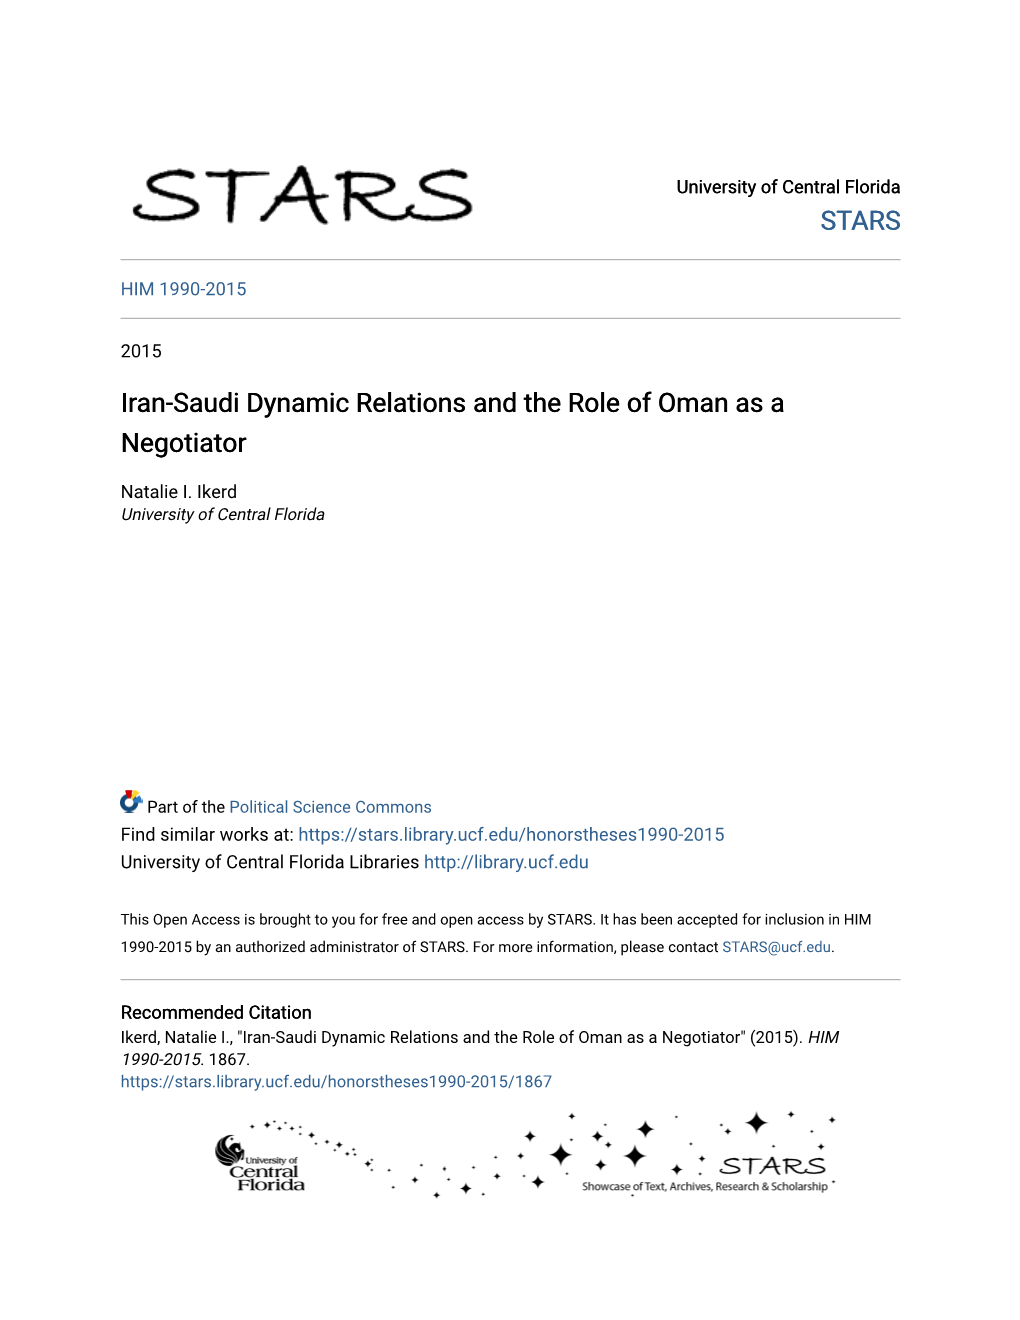 Iran-Saudi Dynamic Relations and the Role of Oman As a Negotiator